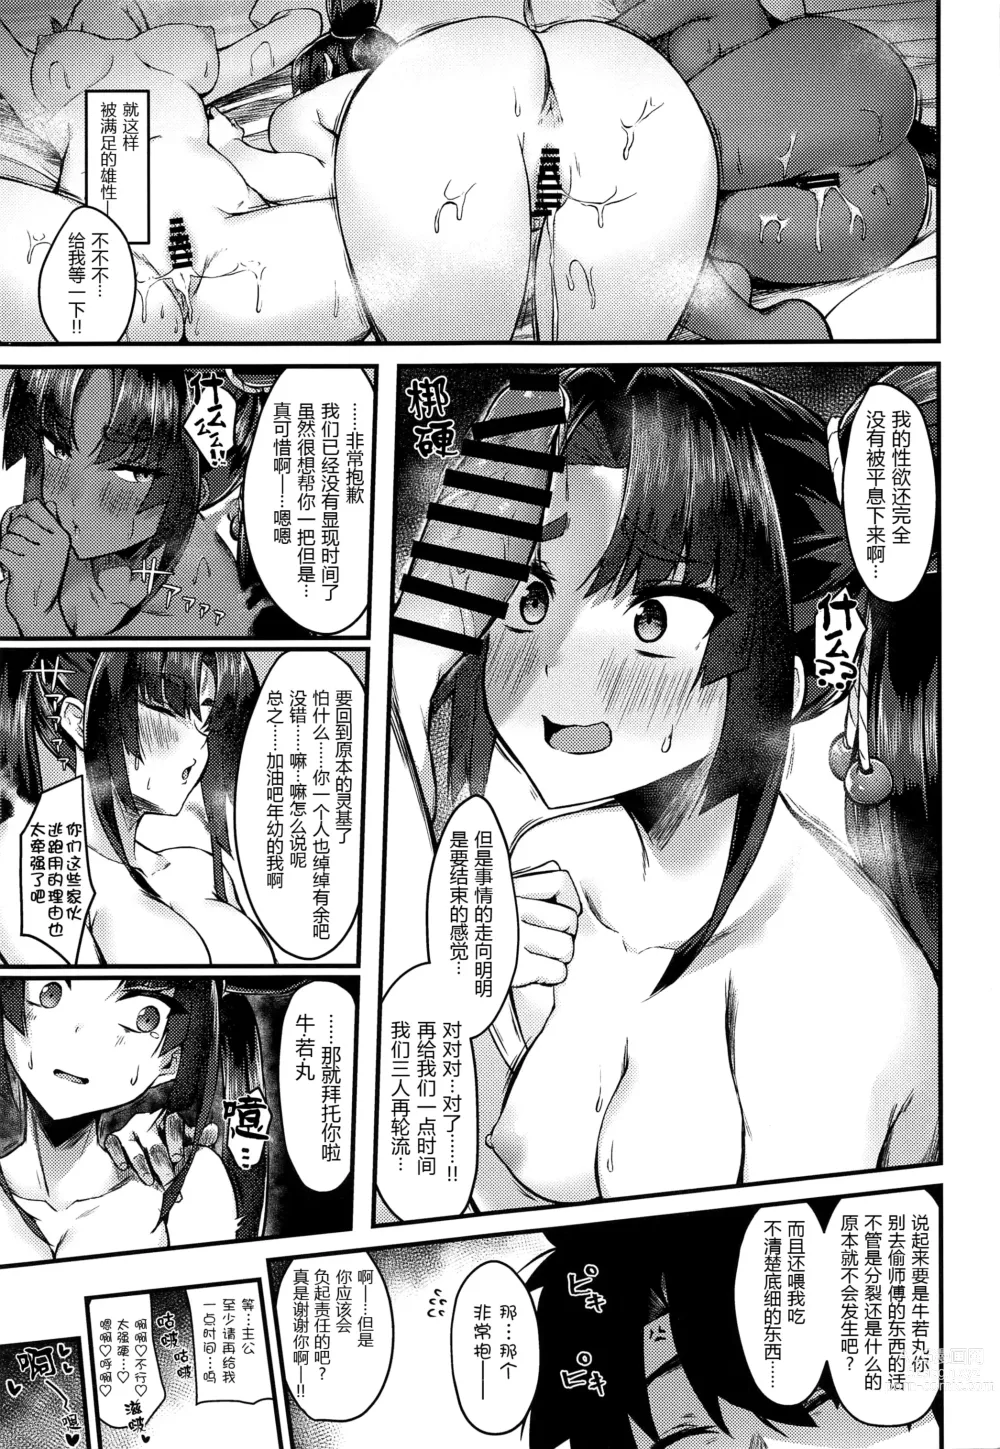 Page 27 of doujinshi Comparing the Ushis